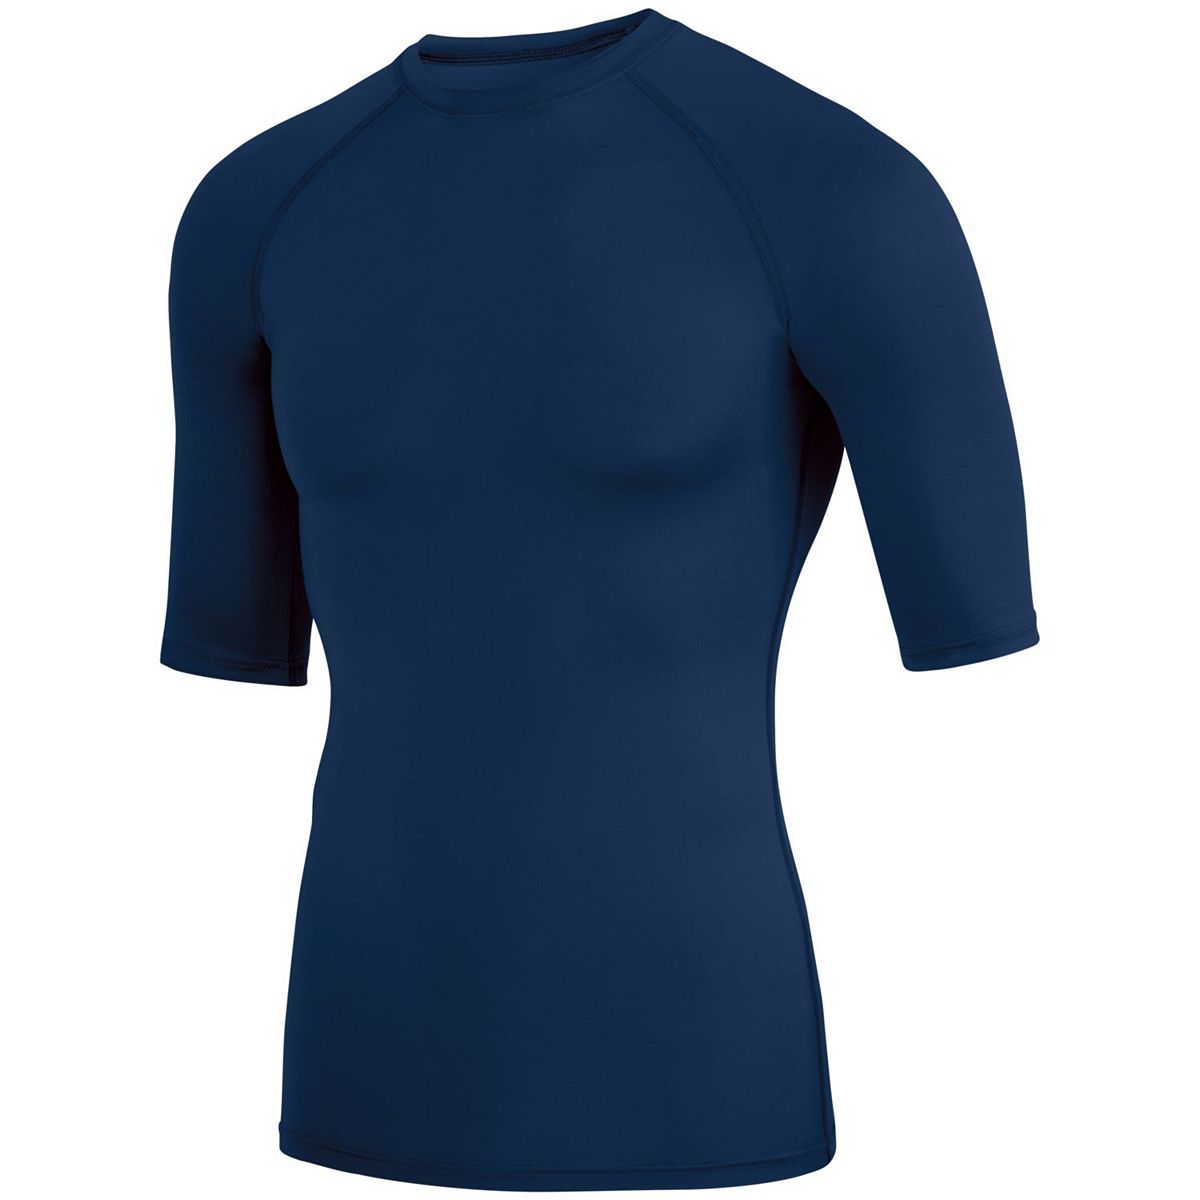 Augusta Sportswear Hyperform Compression Half Sleeve Tee in Navy  -Part of the Adult, Adult-Tee-Shirt, T-Shirts, Augusta-Products, Shirts product lines at KanaleyCreations.com